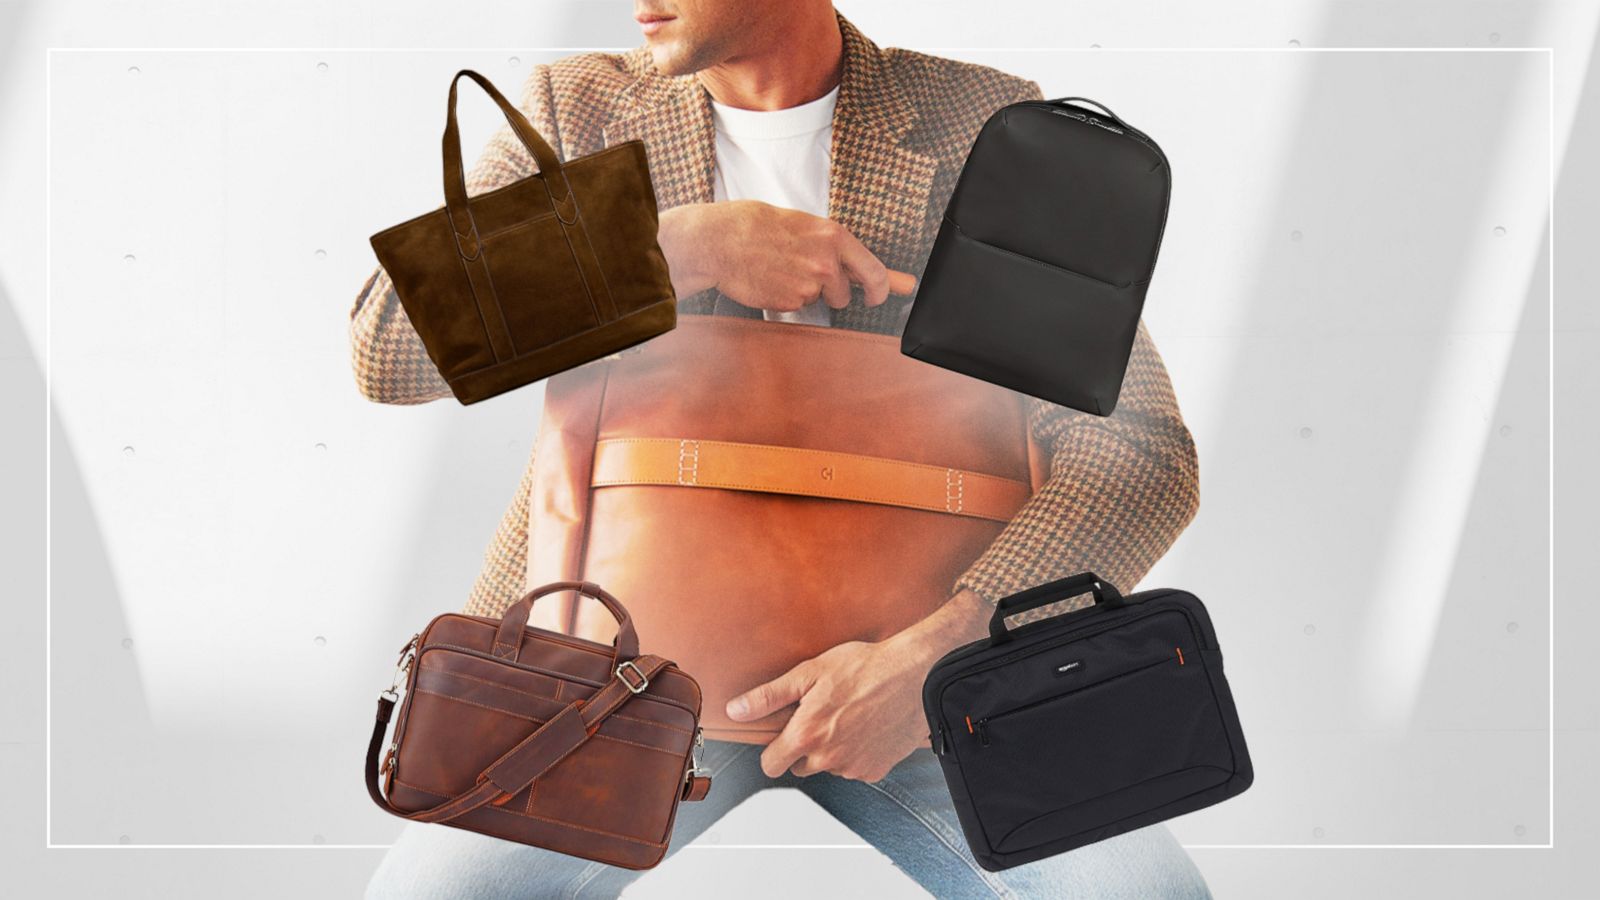 Work bags men will love for the office, commuting and more - Good